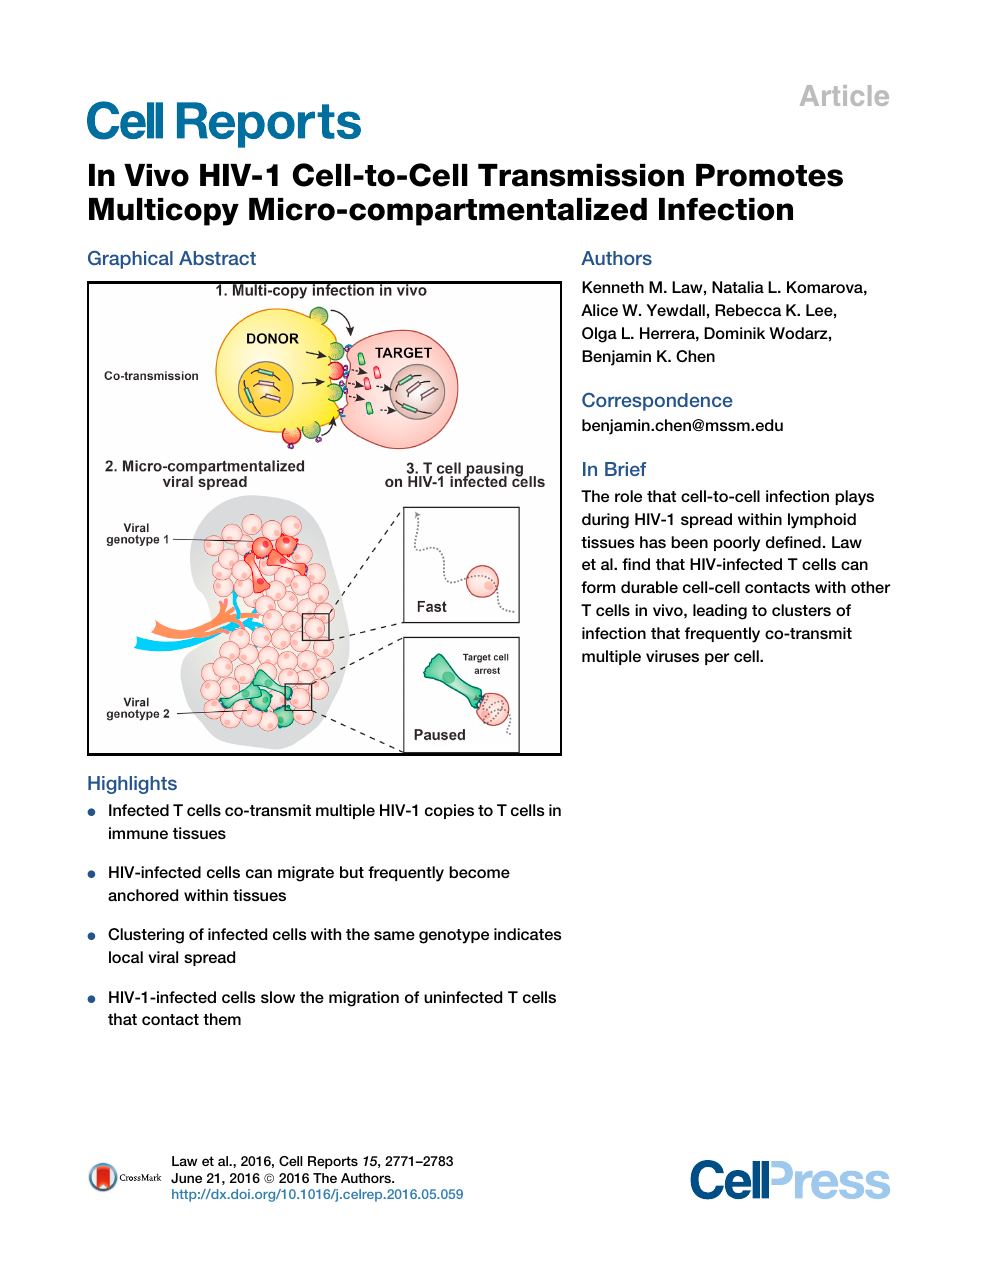 In Vivo Hiv 1 Cell To Cell Transmission Promotes Multicopy Micro Compartmentalized Infection Topic Of Research Paper In Biological Sciences Download Scholarly Article Pdf And Read For Free On Cyberleninka Open Science Hub